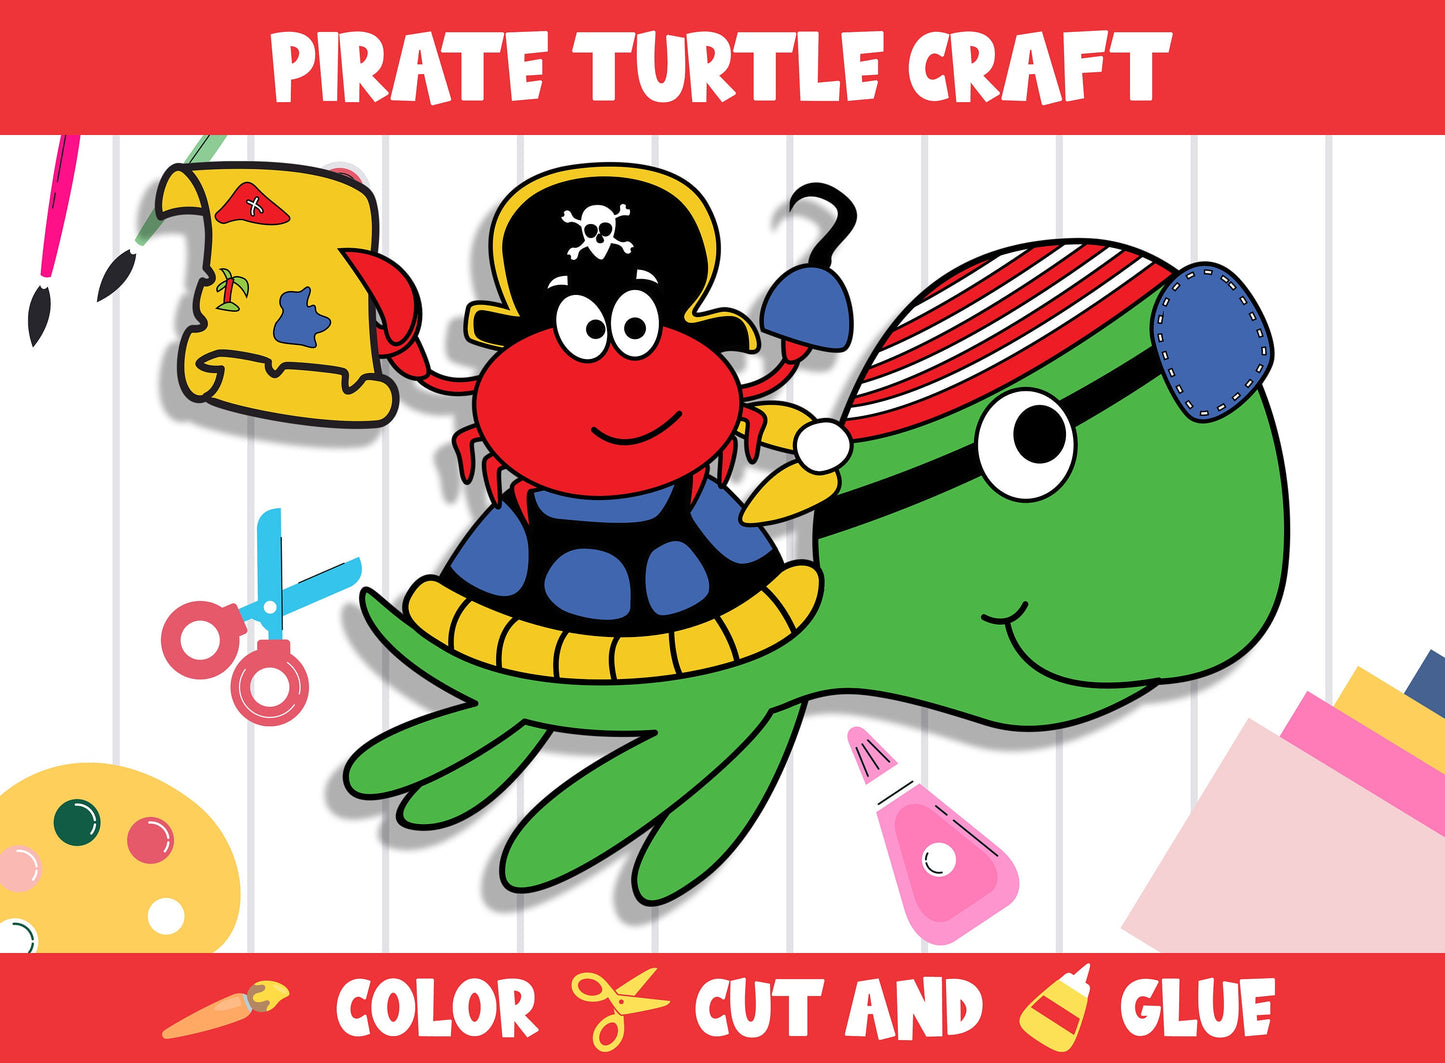 Pirate Turtle Craft Activity - Color, Cut, and Glue for PreK to 2nd Grade, PDF File, Instant Download